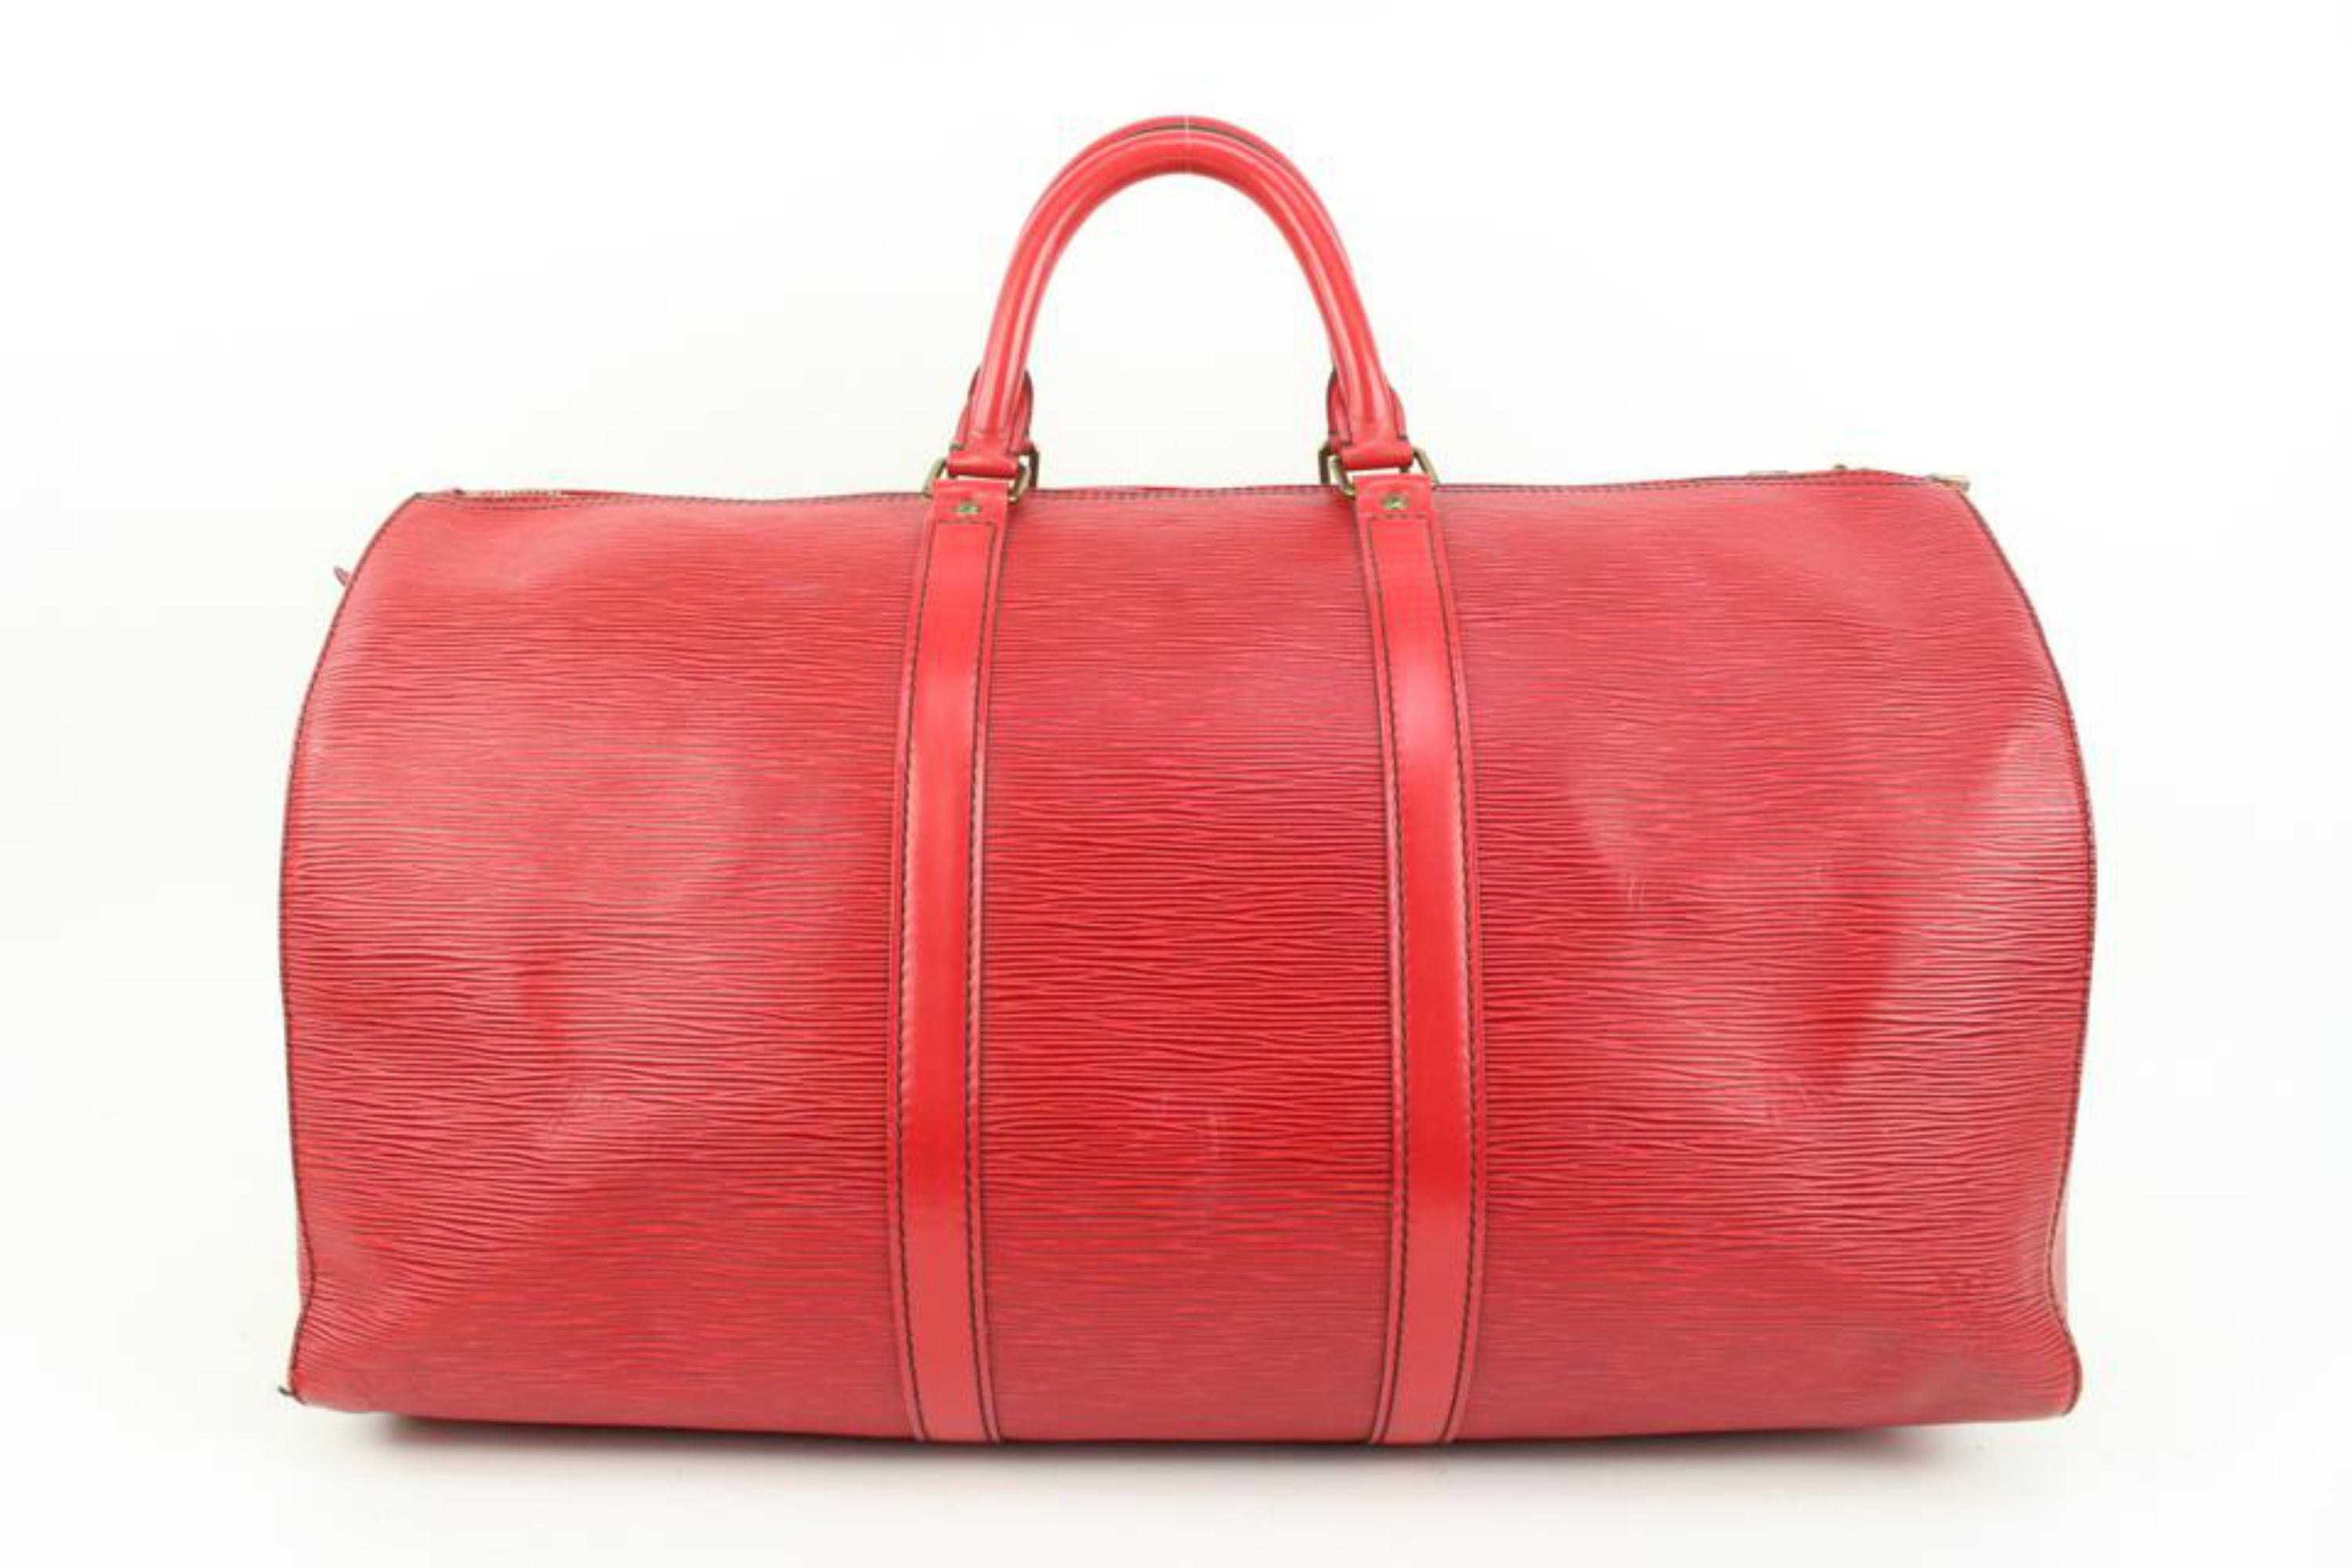 Women's Louis Vuitton Red Epi Leather Keepall 50 Duffle Bag 89lk328s For Sale